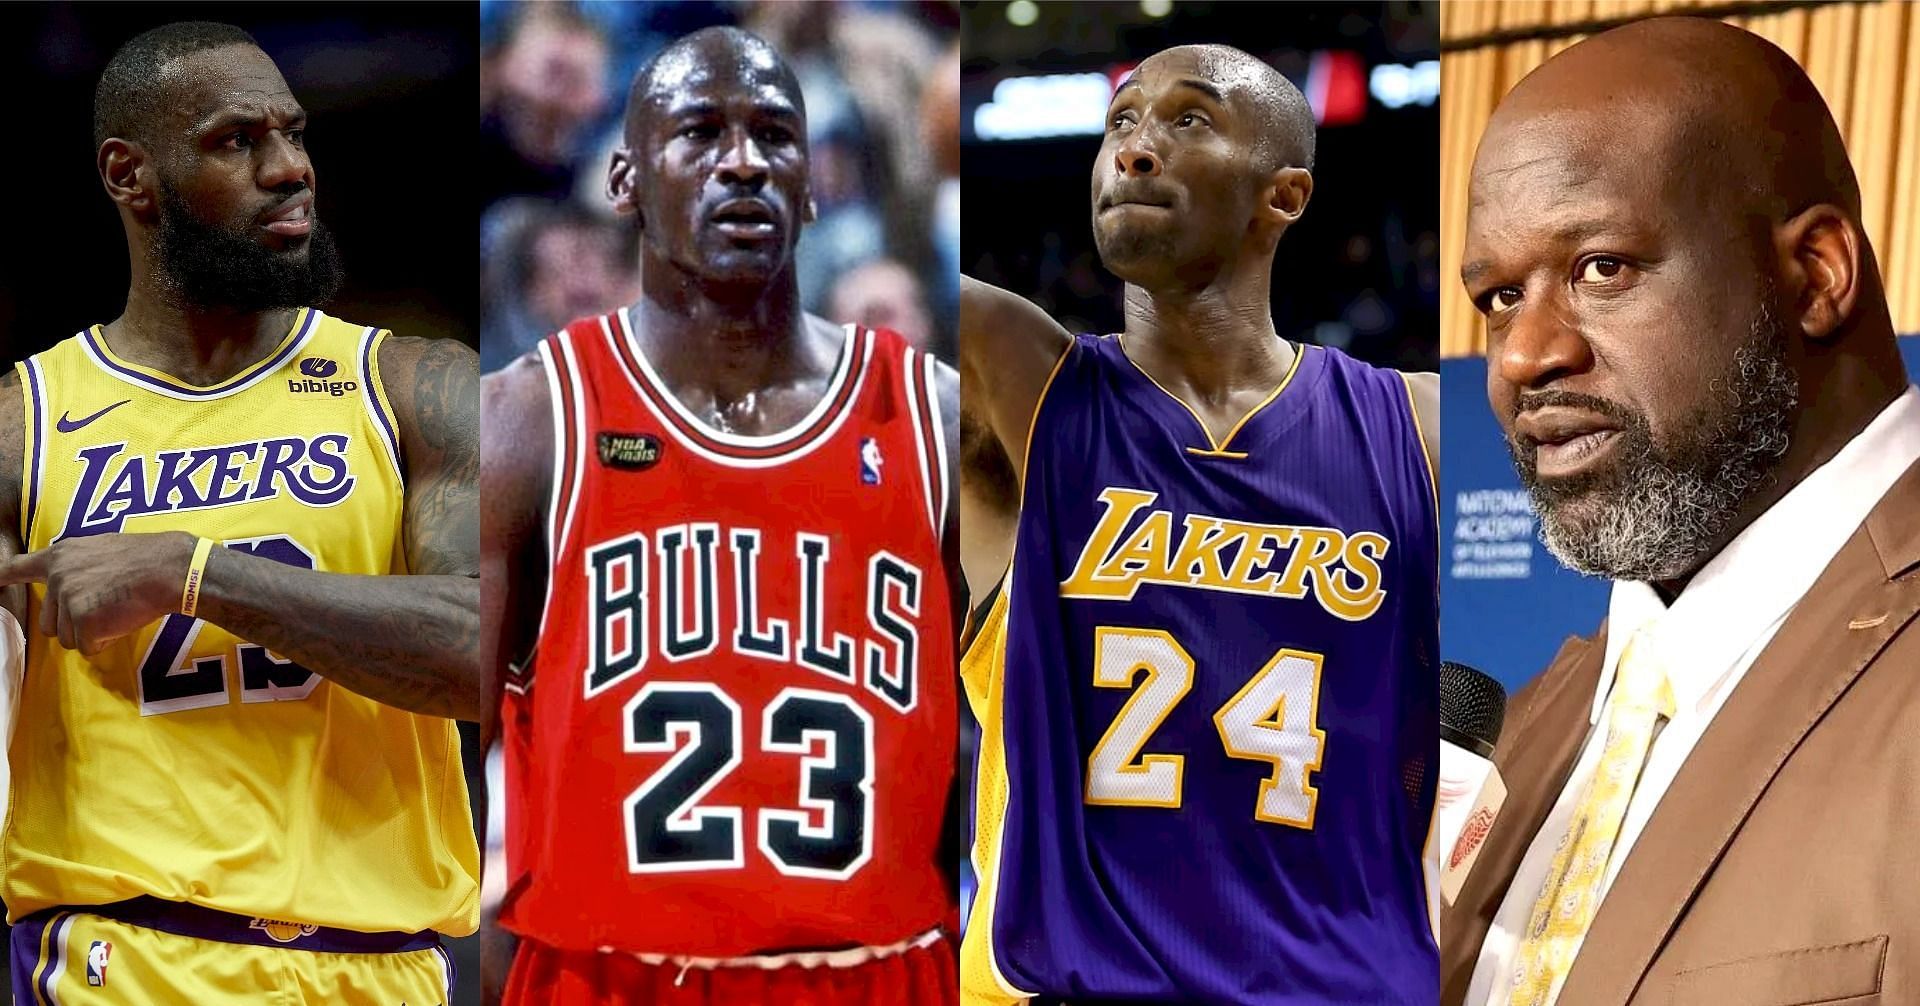 LA Lakers superstar forward LeBron James and NBA legends Michael Jordan, Kobe Bryant and Shaquille O&rsquo;Neal